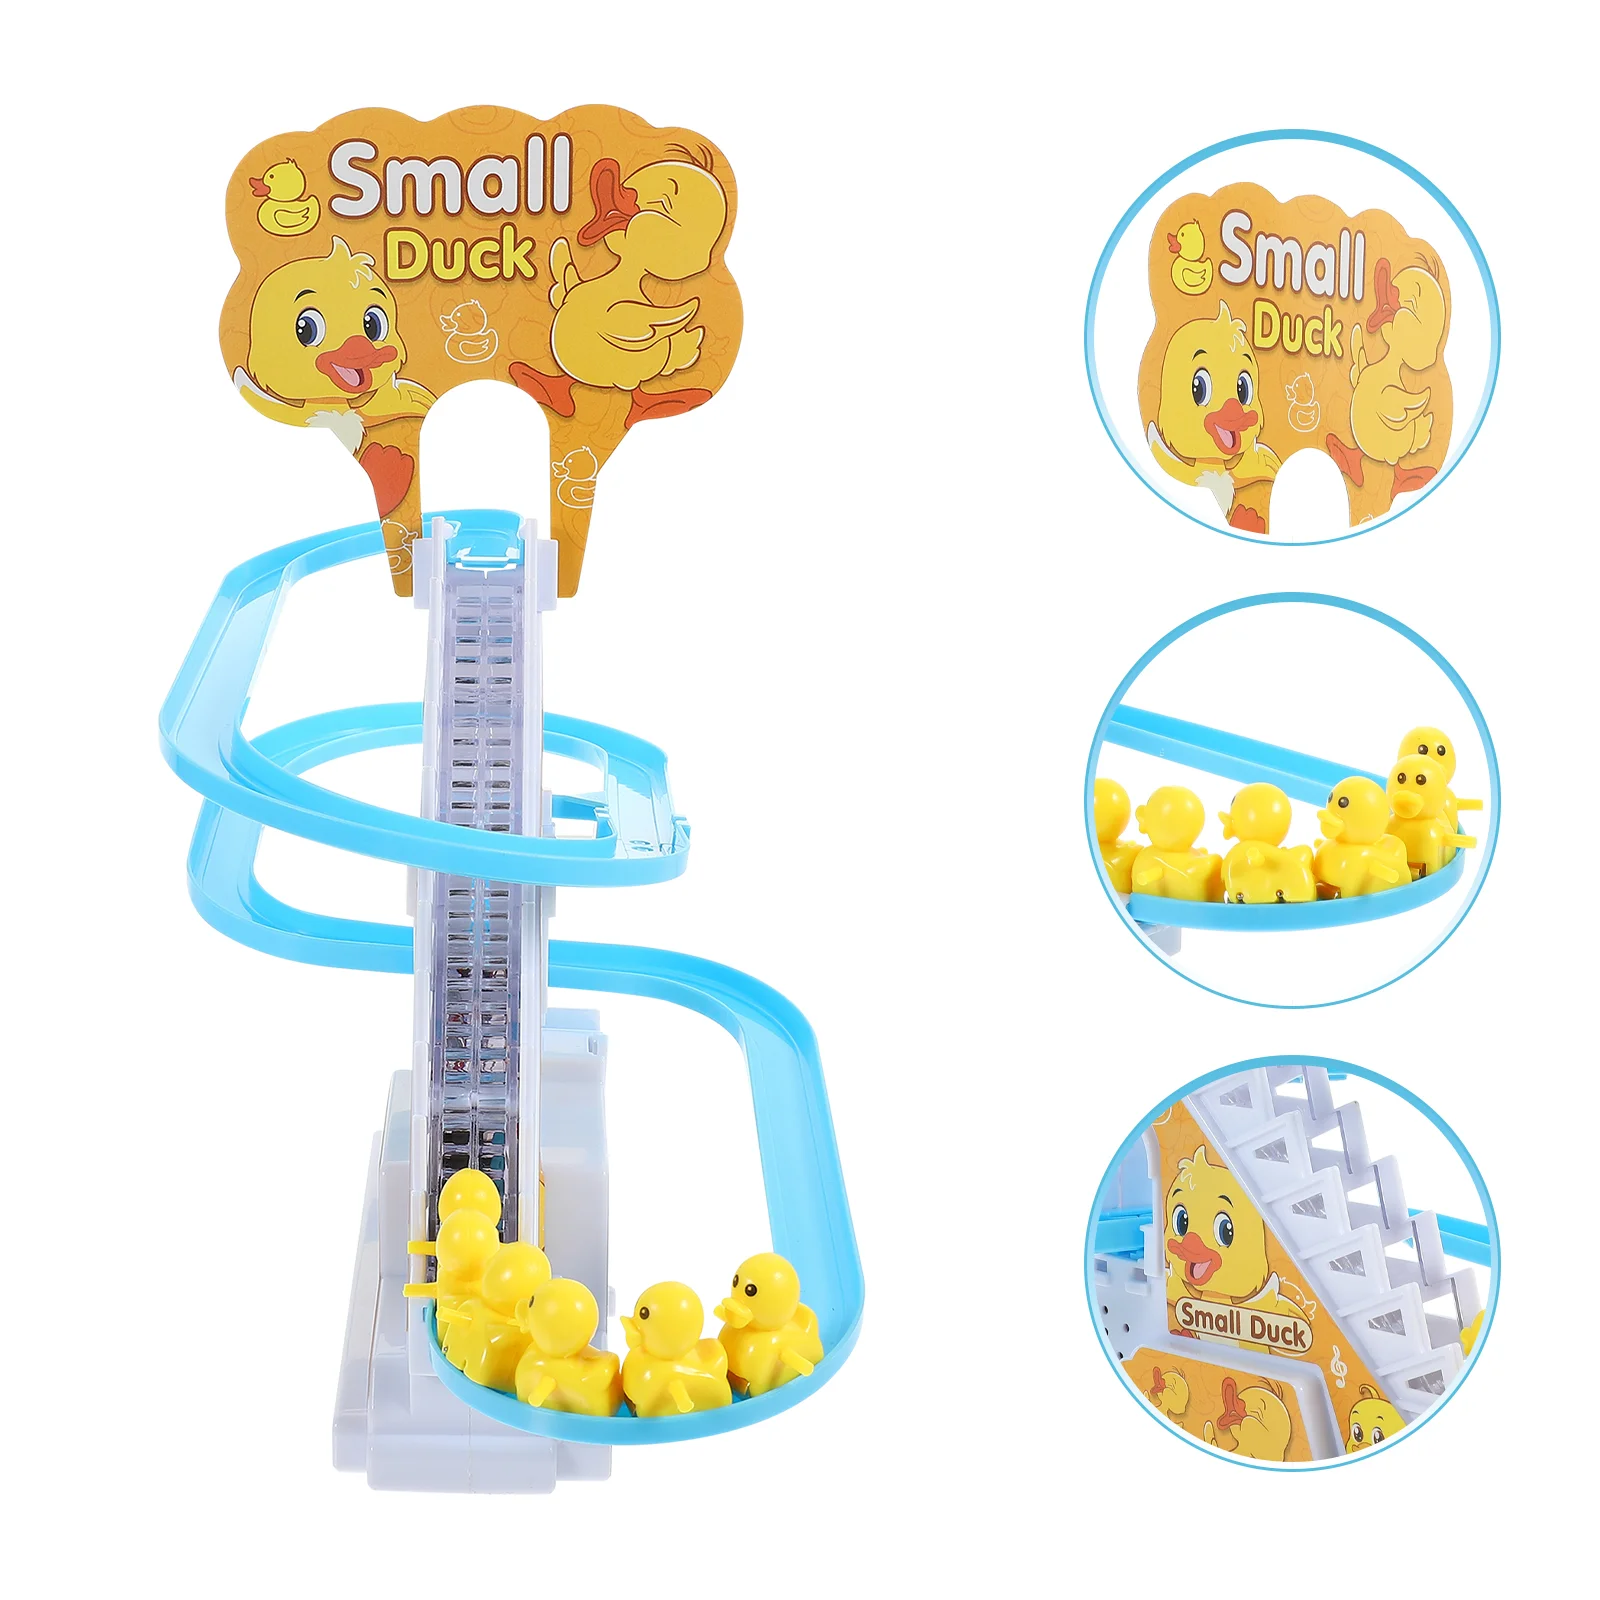 

Toy Duck Slide Toys Kids Coaster Roller Stair Track Stairs Climb Year Old Boy Electric Climbing Duckling Educational Children